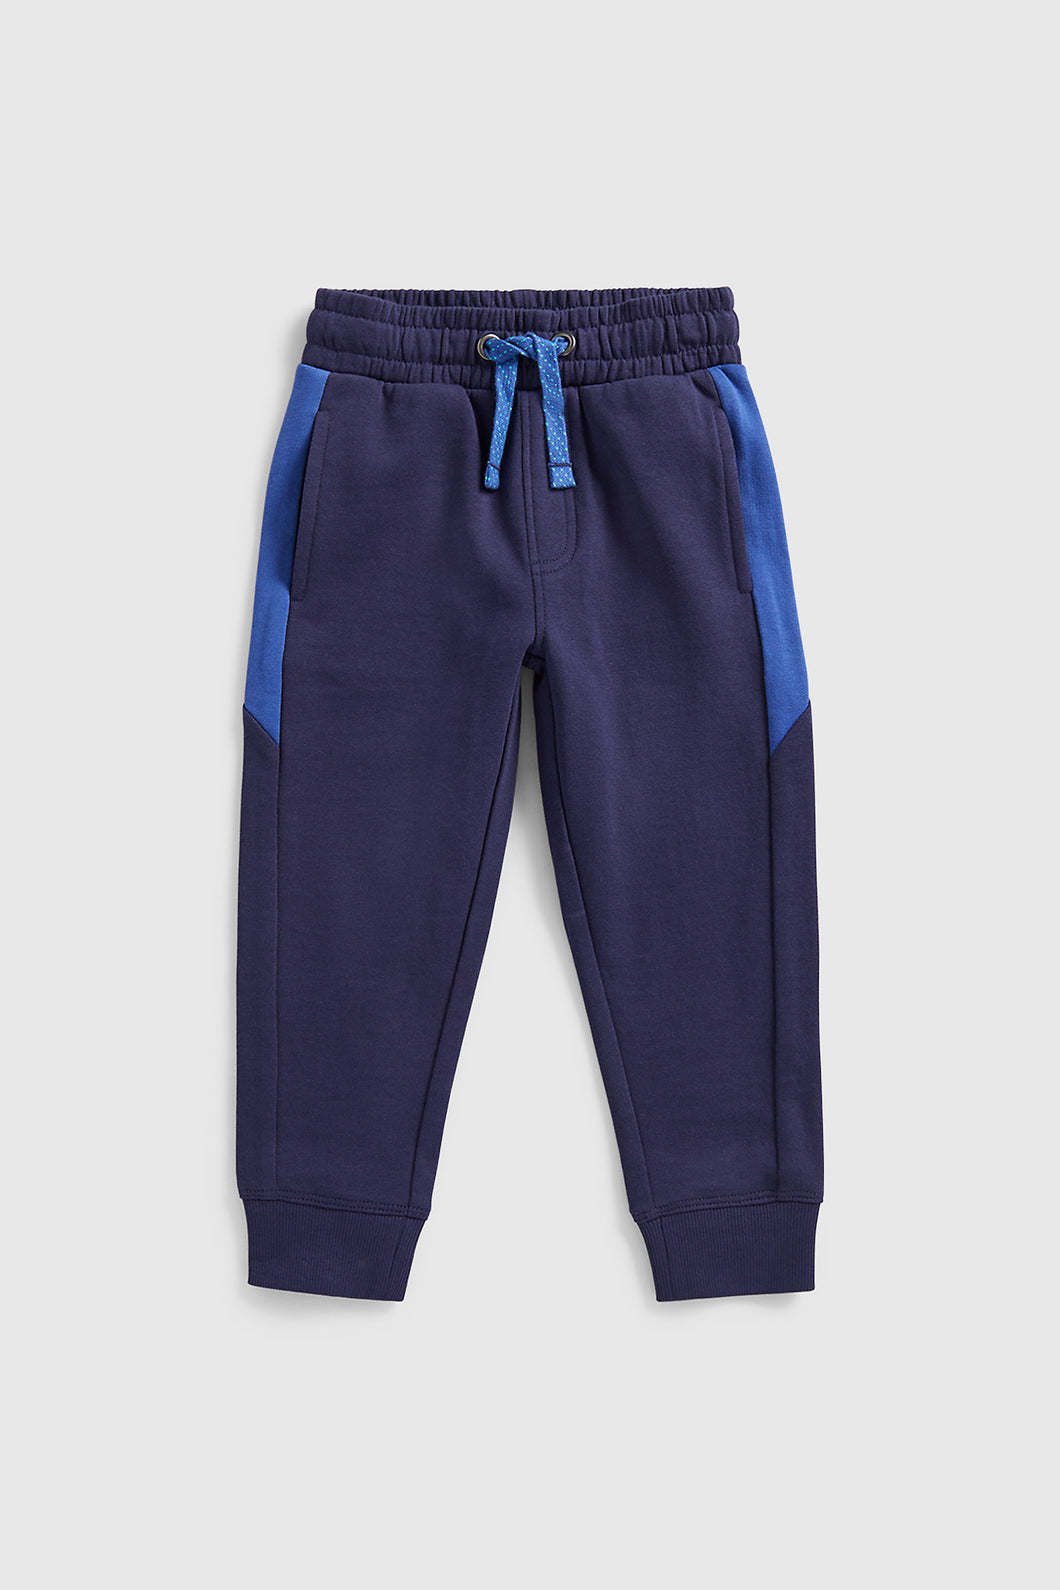 Mothercare Navy Joggers